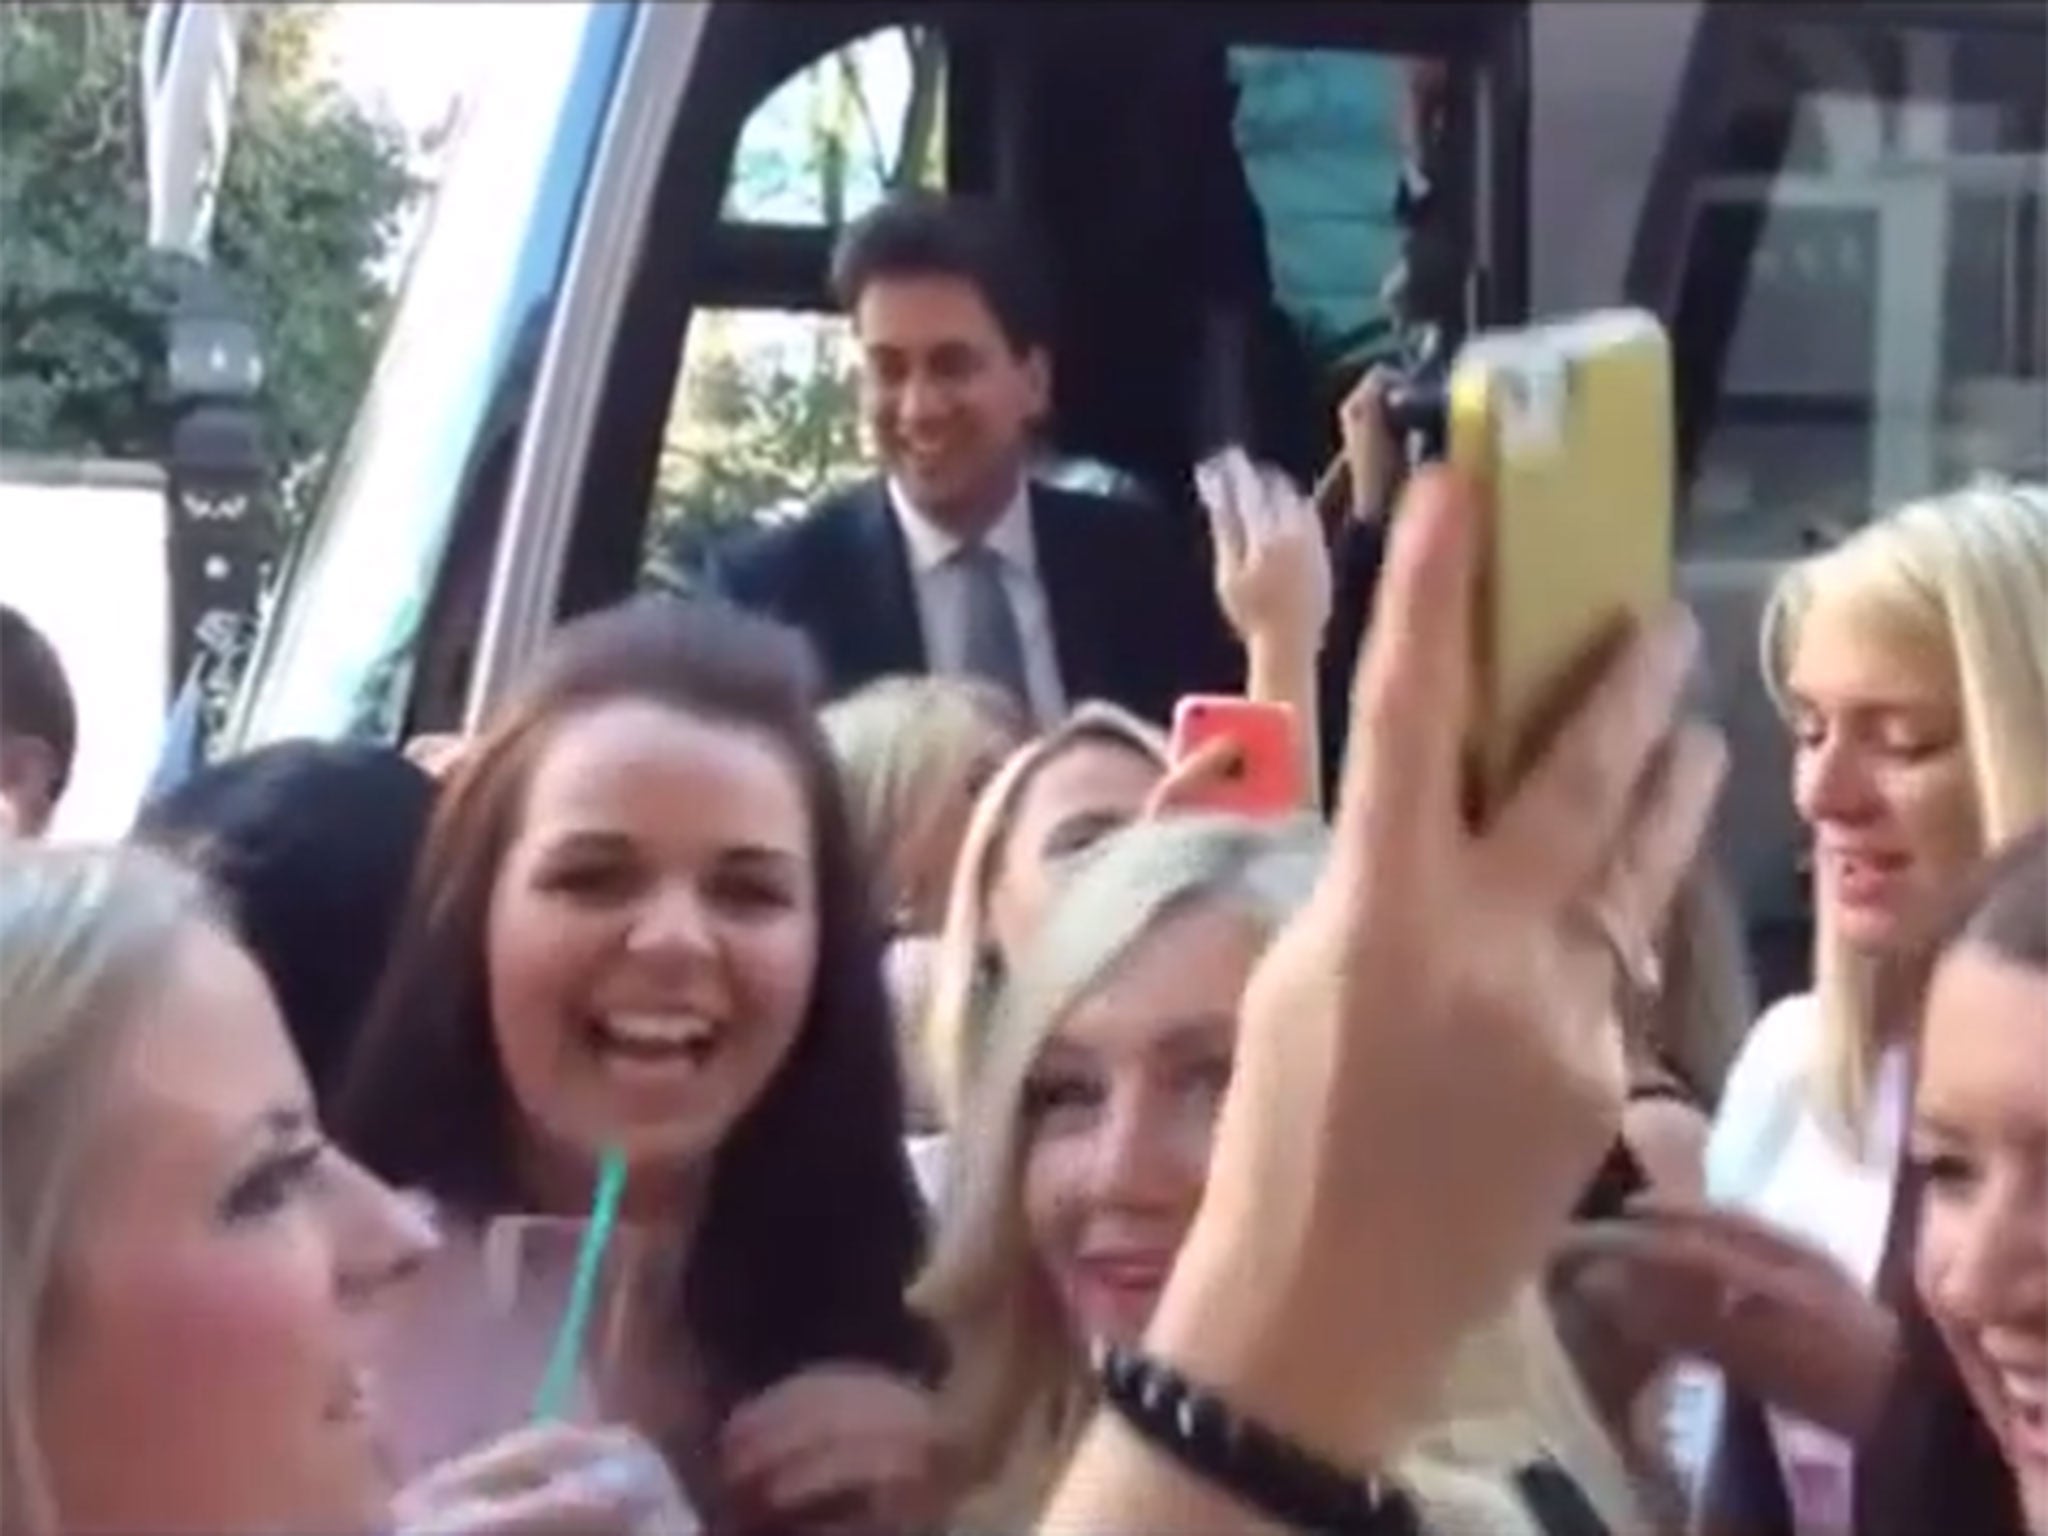 Ed Miliband received a warm welcome in Chester